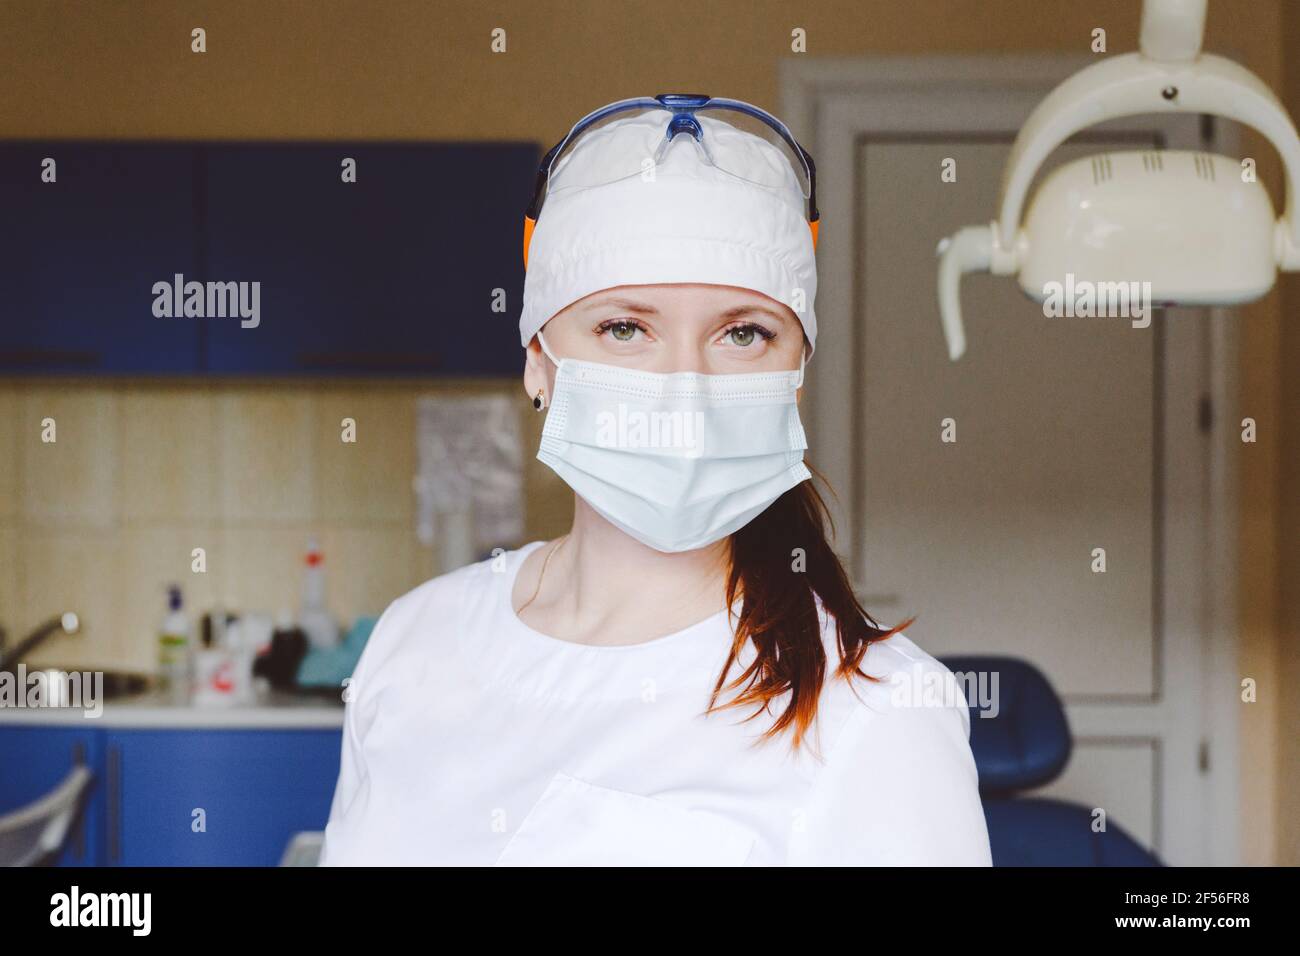 Portrait of female dentist wearing protective face mask Stock Photo